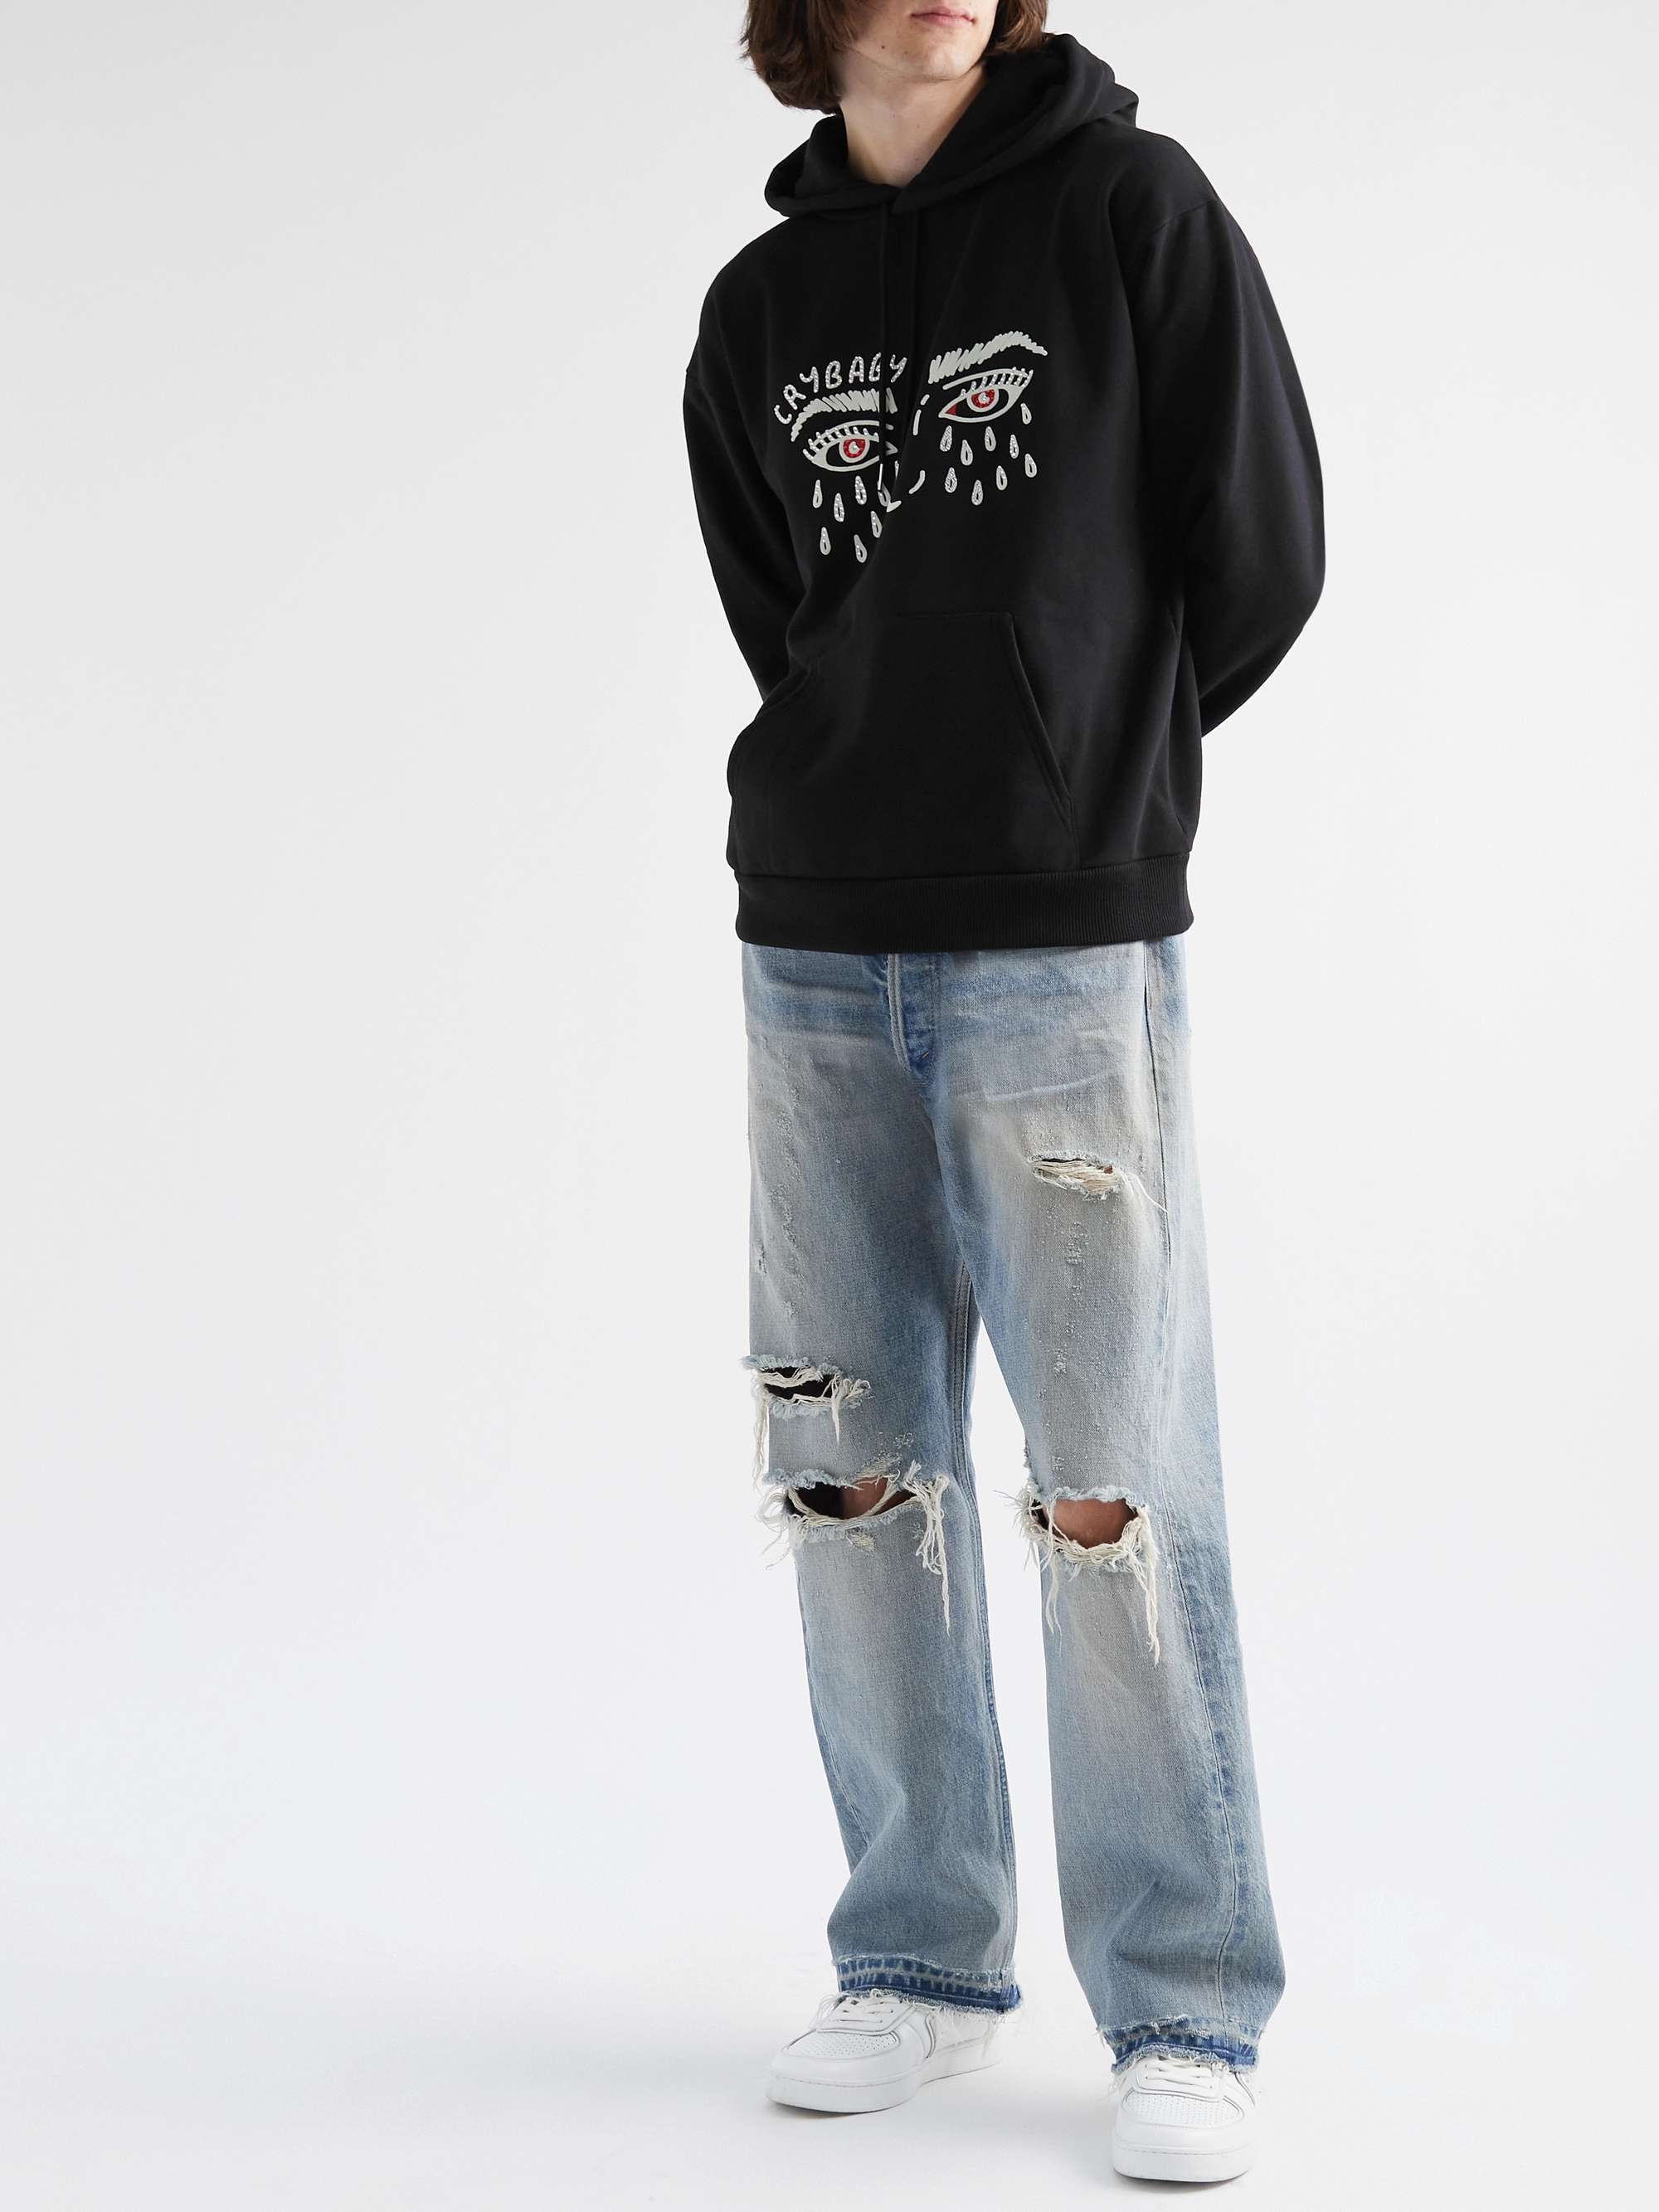 CELINE HOMME Cry Baby Oversized Embellished Cotton-Blend Jersey Hoodie